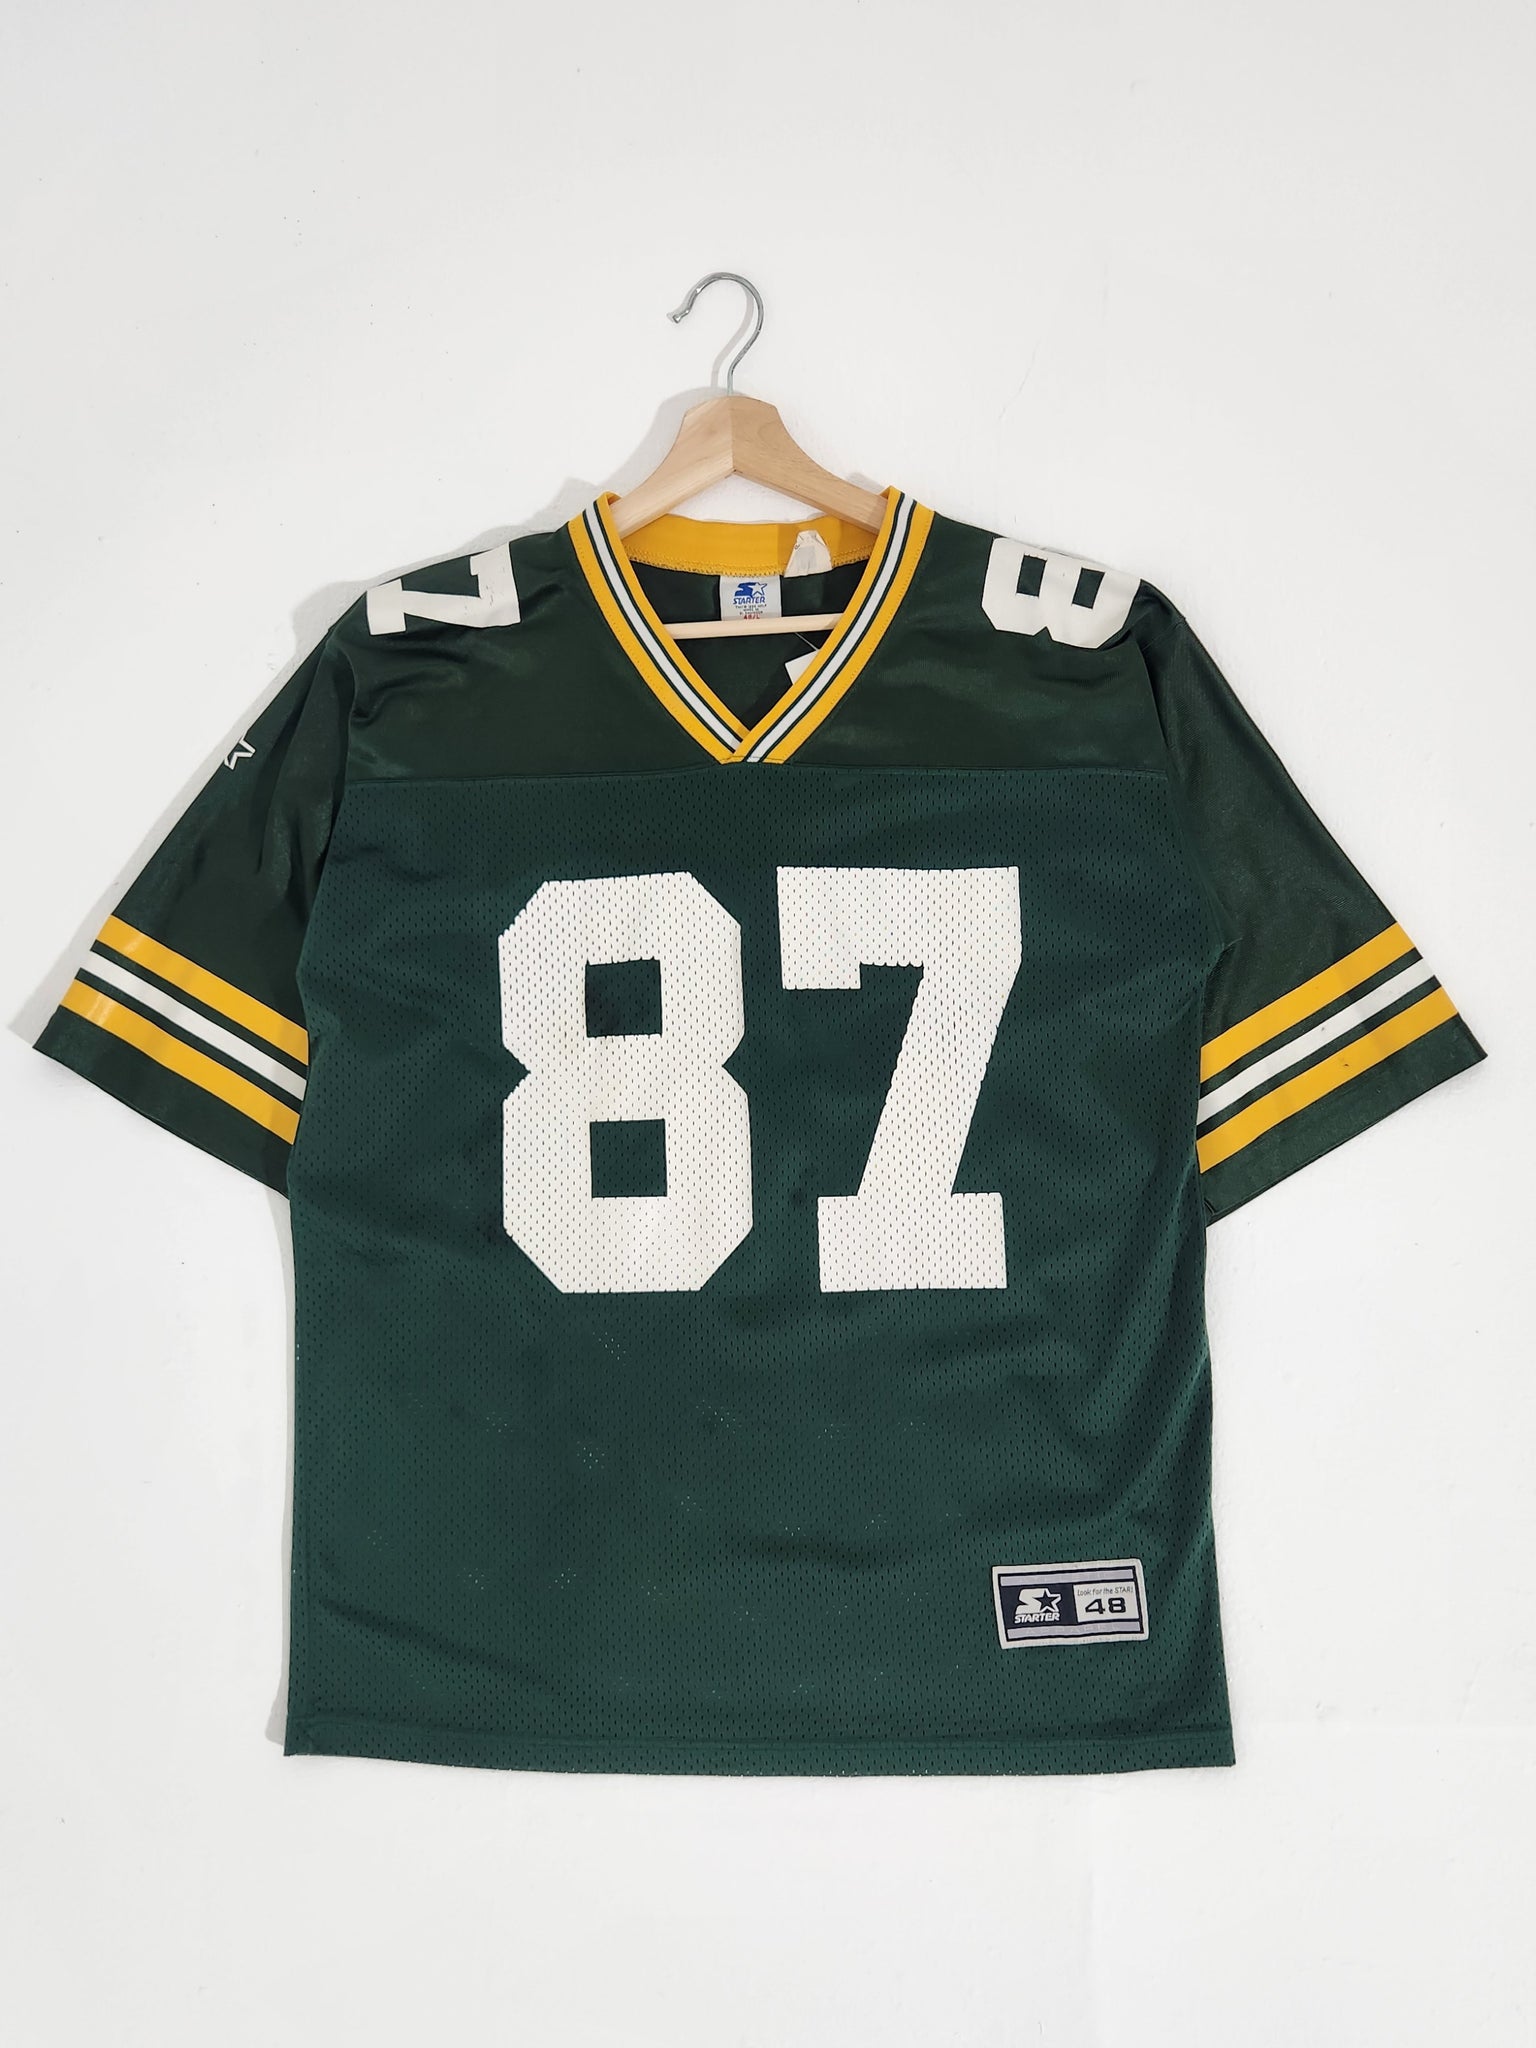 Vintage 90s Clothing NFL Green Bay Packers Football Starter 